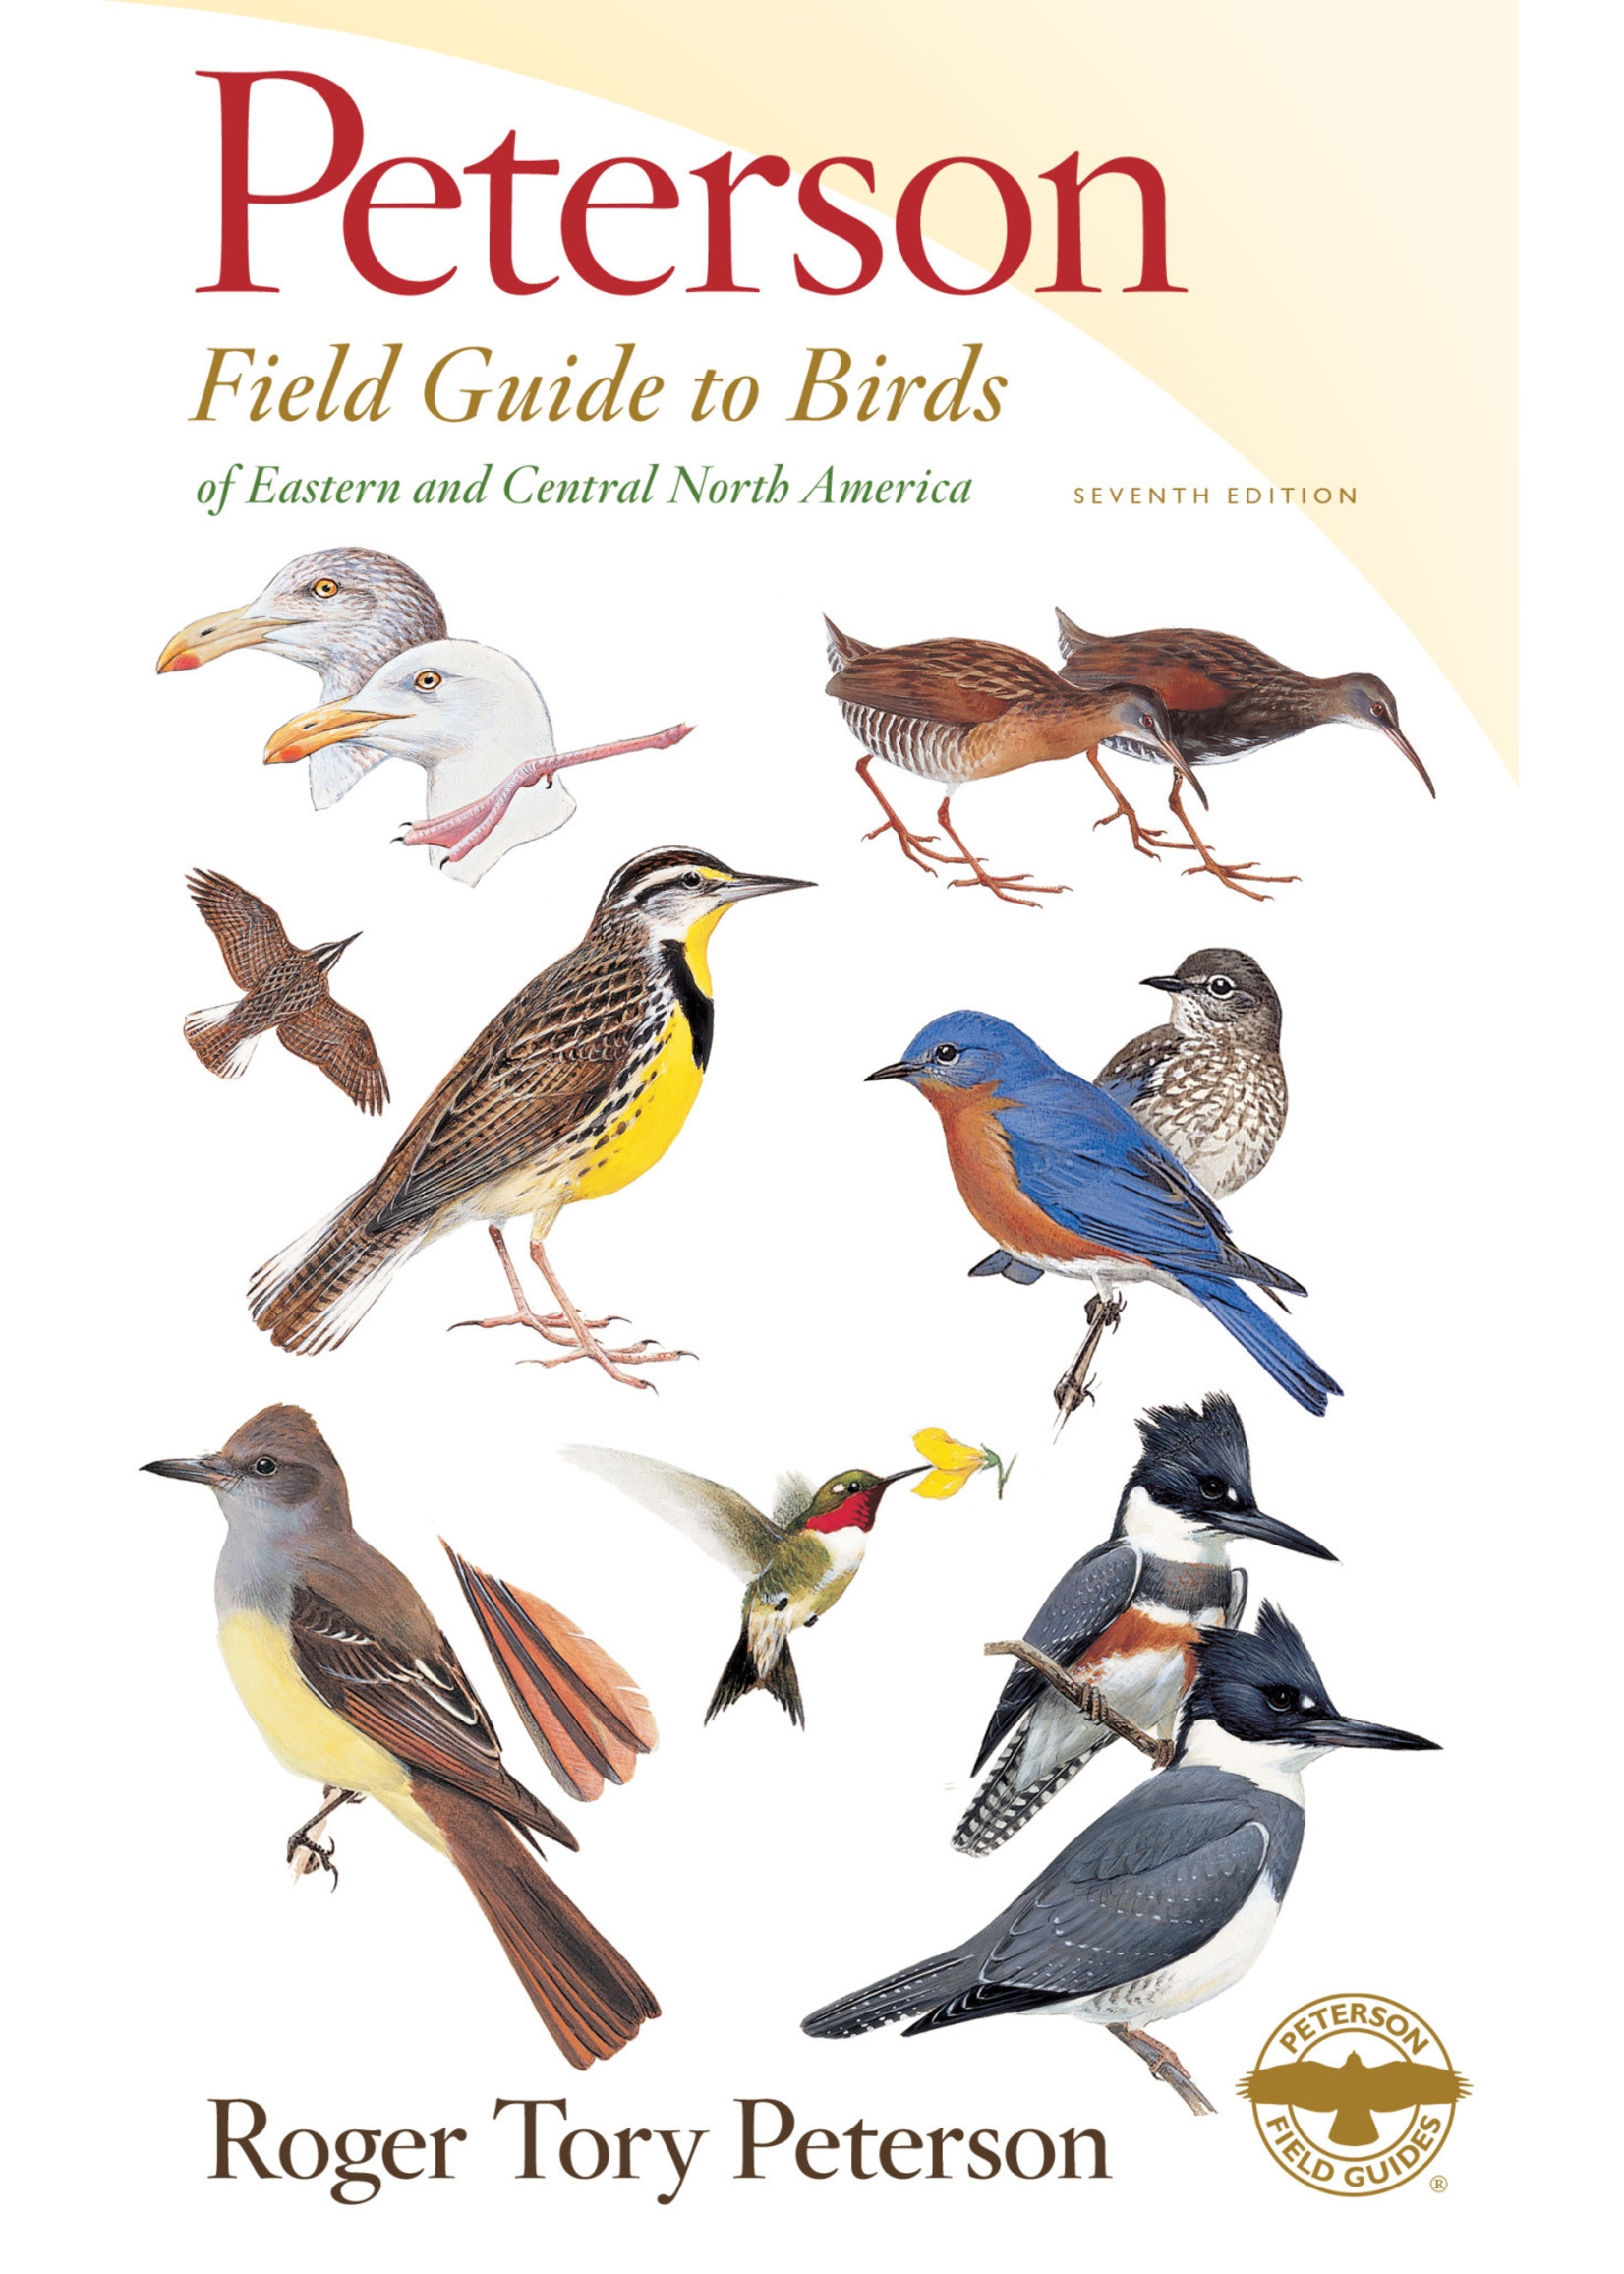 Peterson Field Guide to Birds of Eastern and Central North America, 7th Ed. (Peterson Field Guides #1) by Roger Tory Peterson